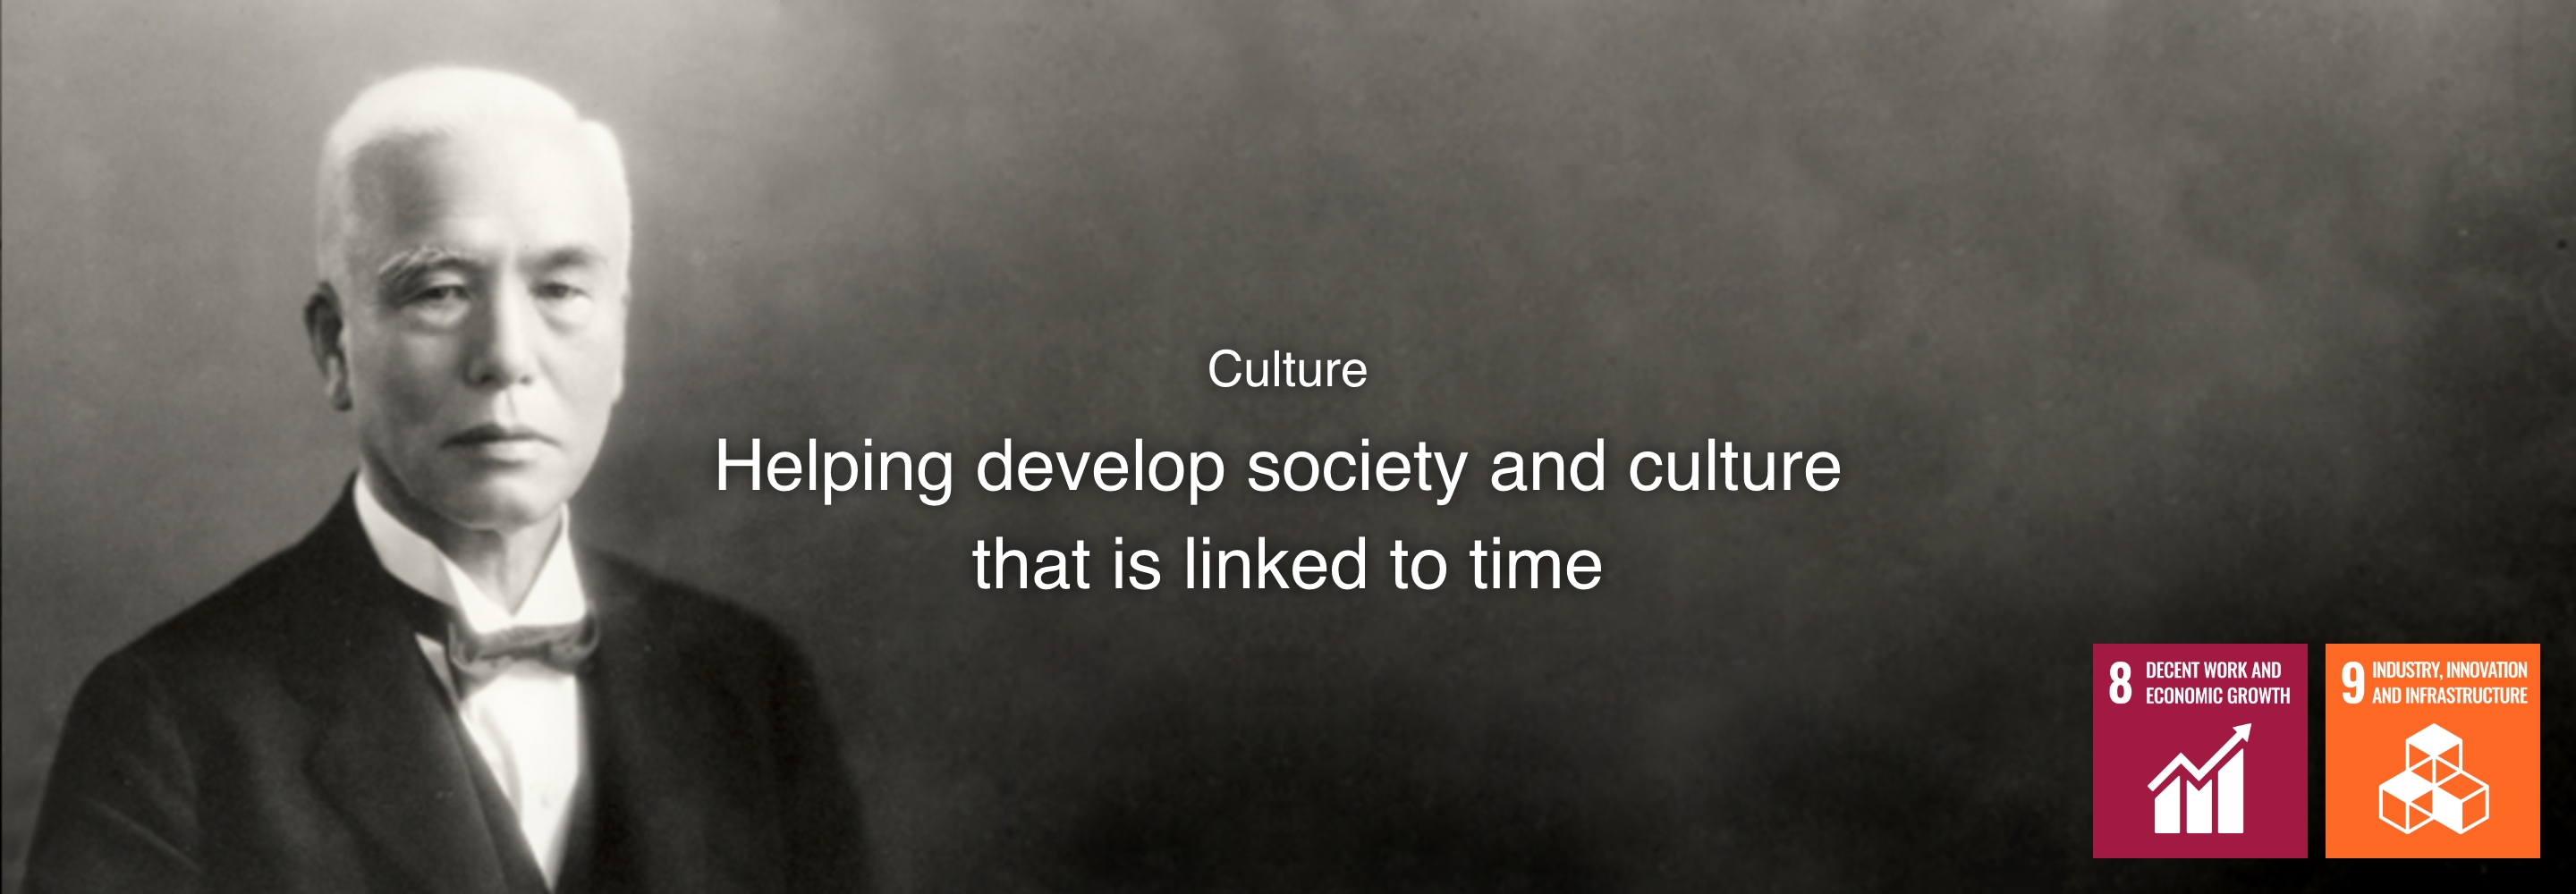 Culture helping develop society and culture that is linked to time